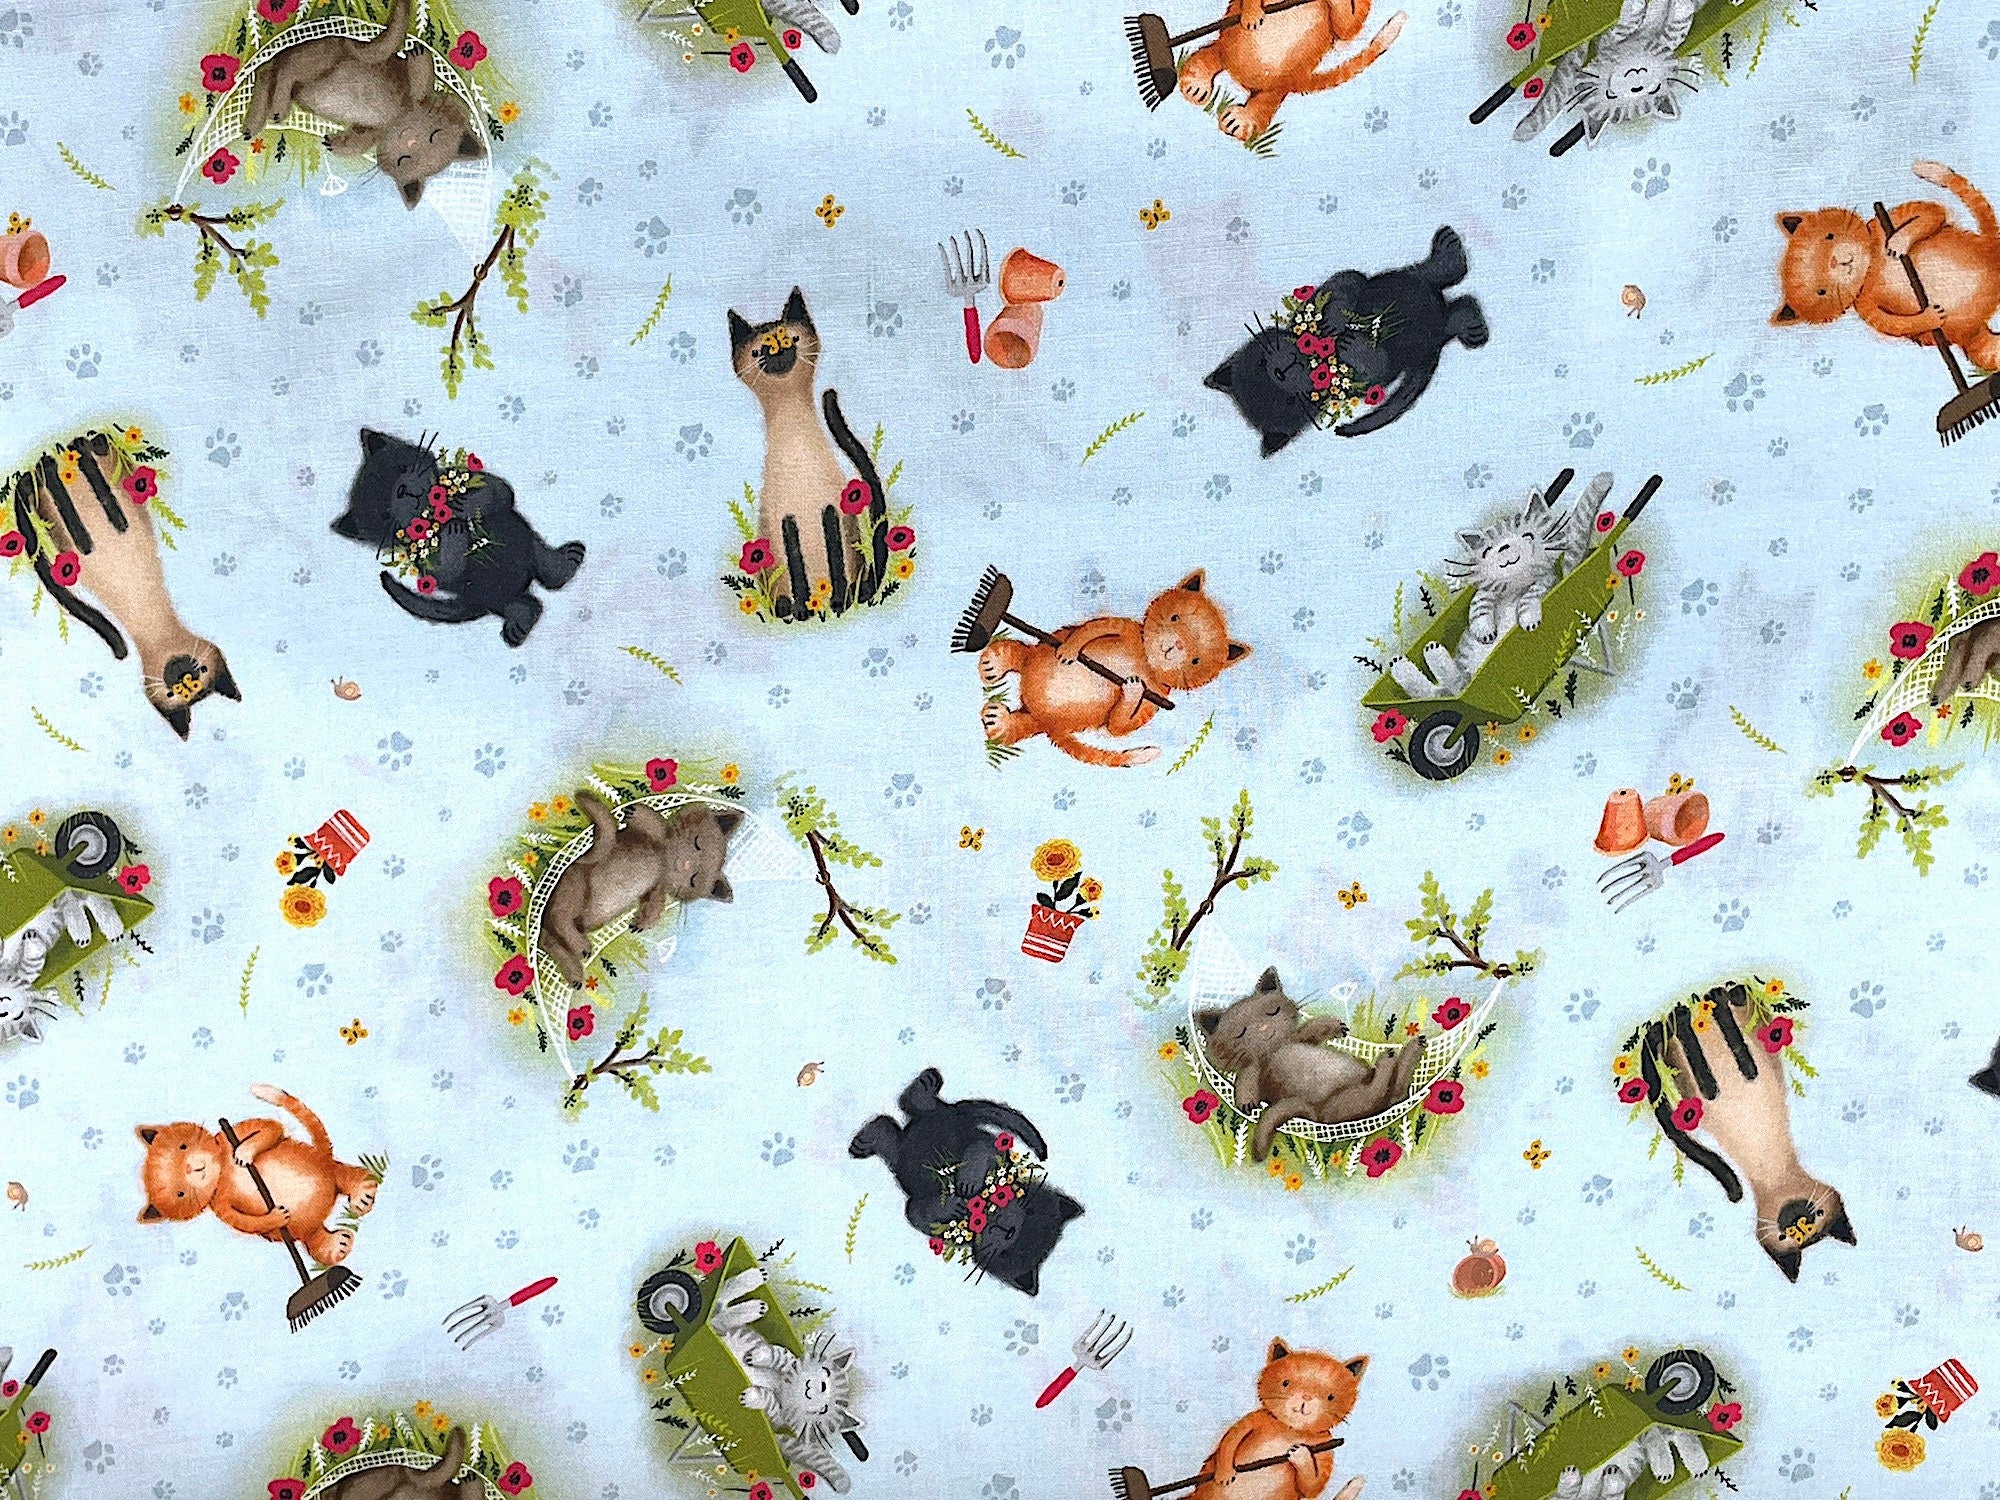 This blue/grey fabric is called Pretty Cats in the Garden and is covered with cats. Some of the cats are working in the garden, some are laying in a wheelbarrow or hammock. There are small pots of flowers and small garden hand rakes throughout the fabric. You will also find paw prints on the background.